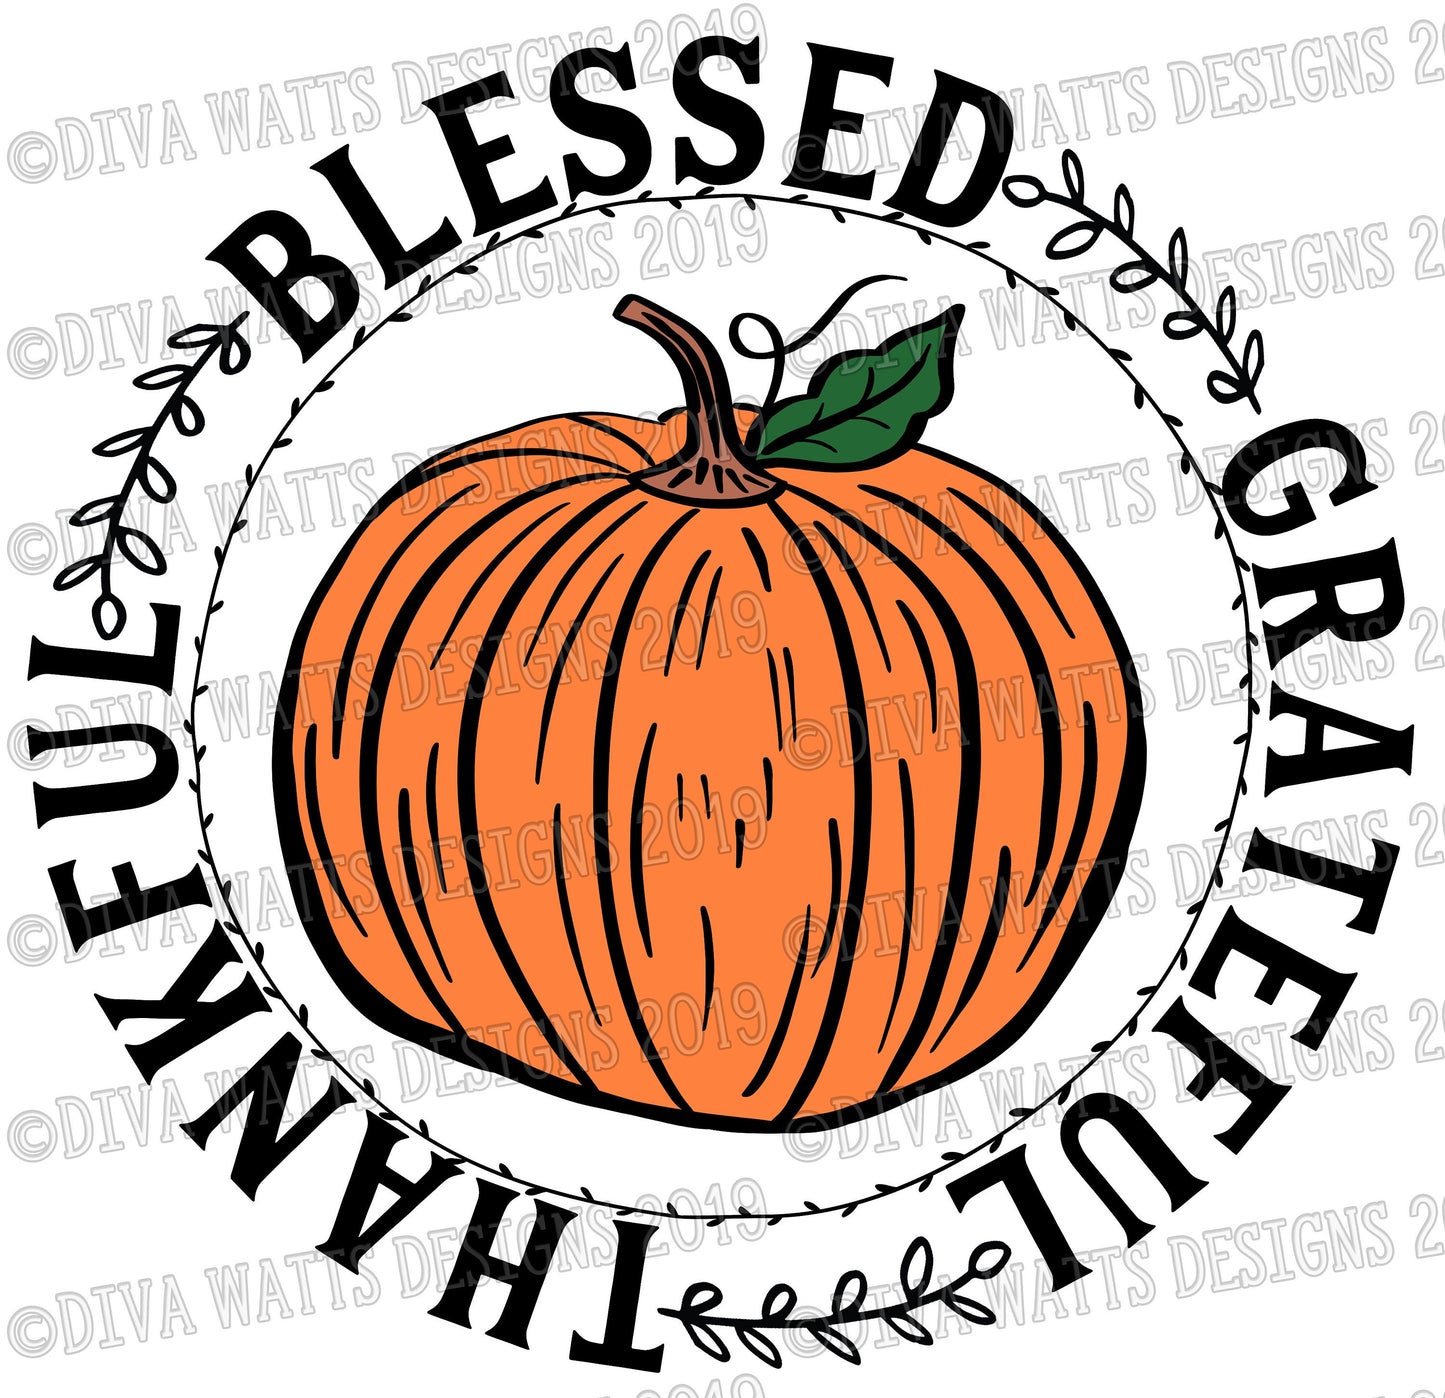 SVG Grateful Thankful Blessed | Thanksgiving | Fall | Autumn | Pumpkin | Wreath | Cutting File Instant Download DXF PNG eps | Vinyl Stencil